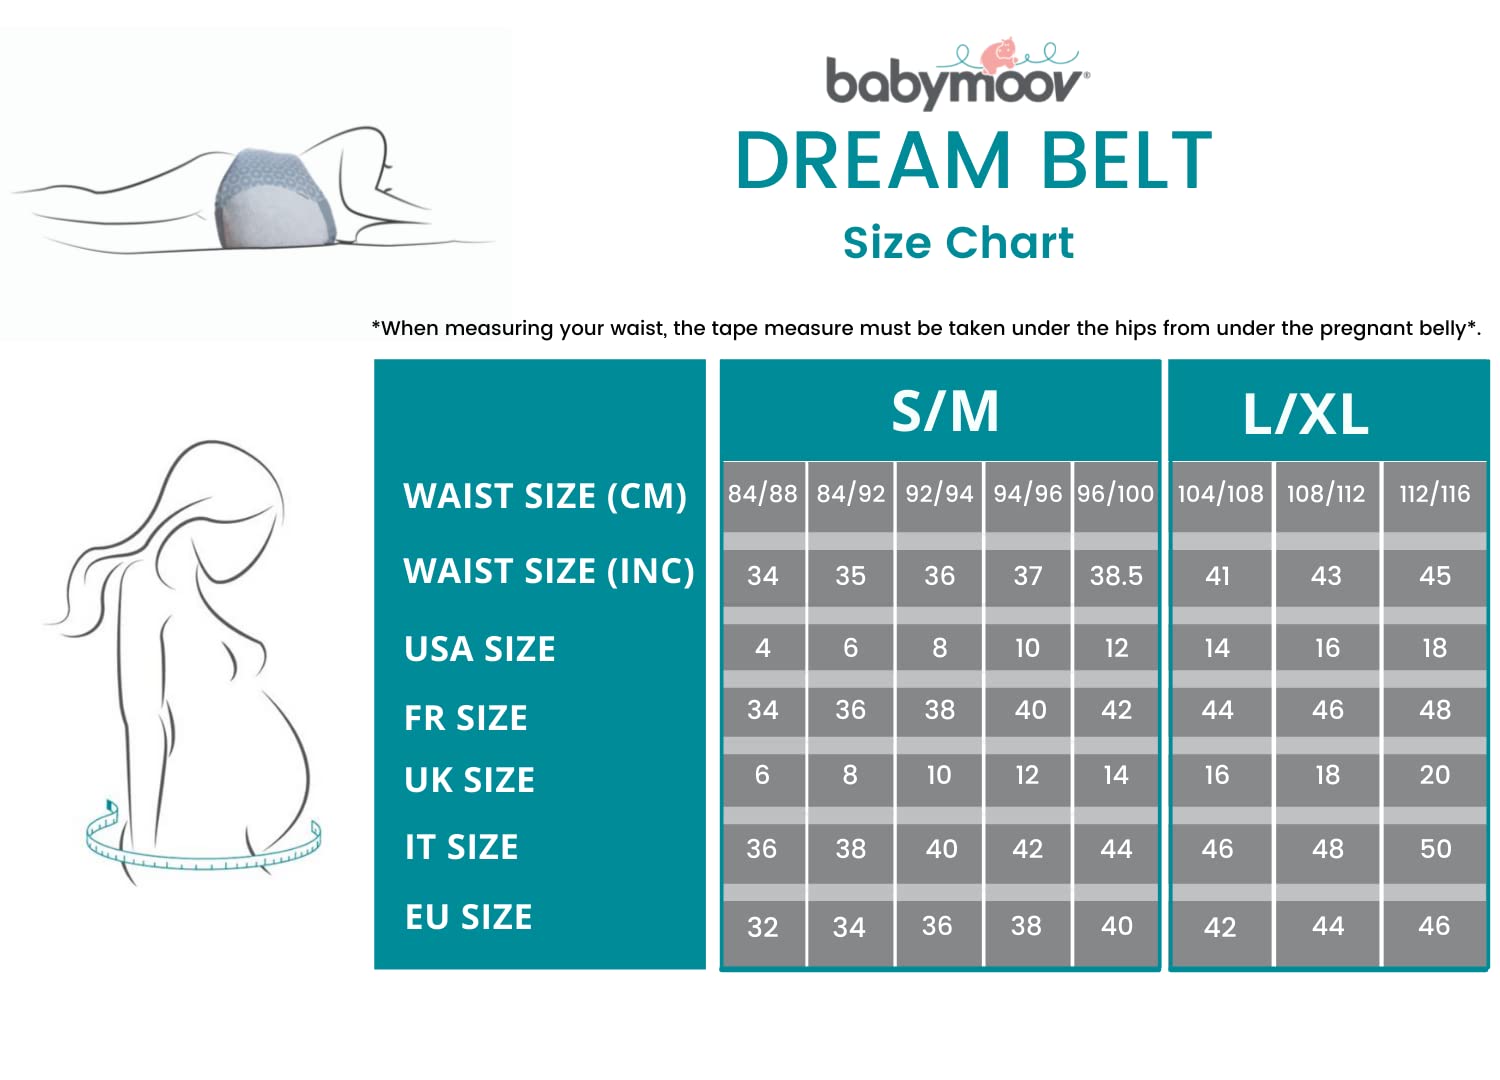 Babymoov Dream Belt Sleep Aid, Maternity Sleep Support & Wedge for Ultimate Comfort during Pregnancy, Large / X-Large (Pack of 1)